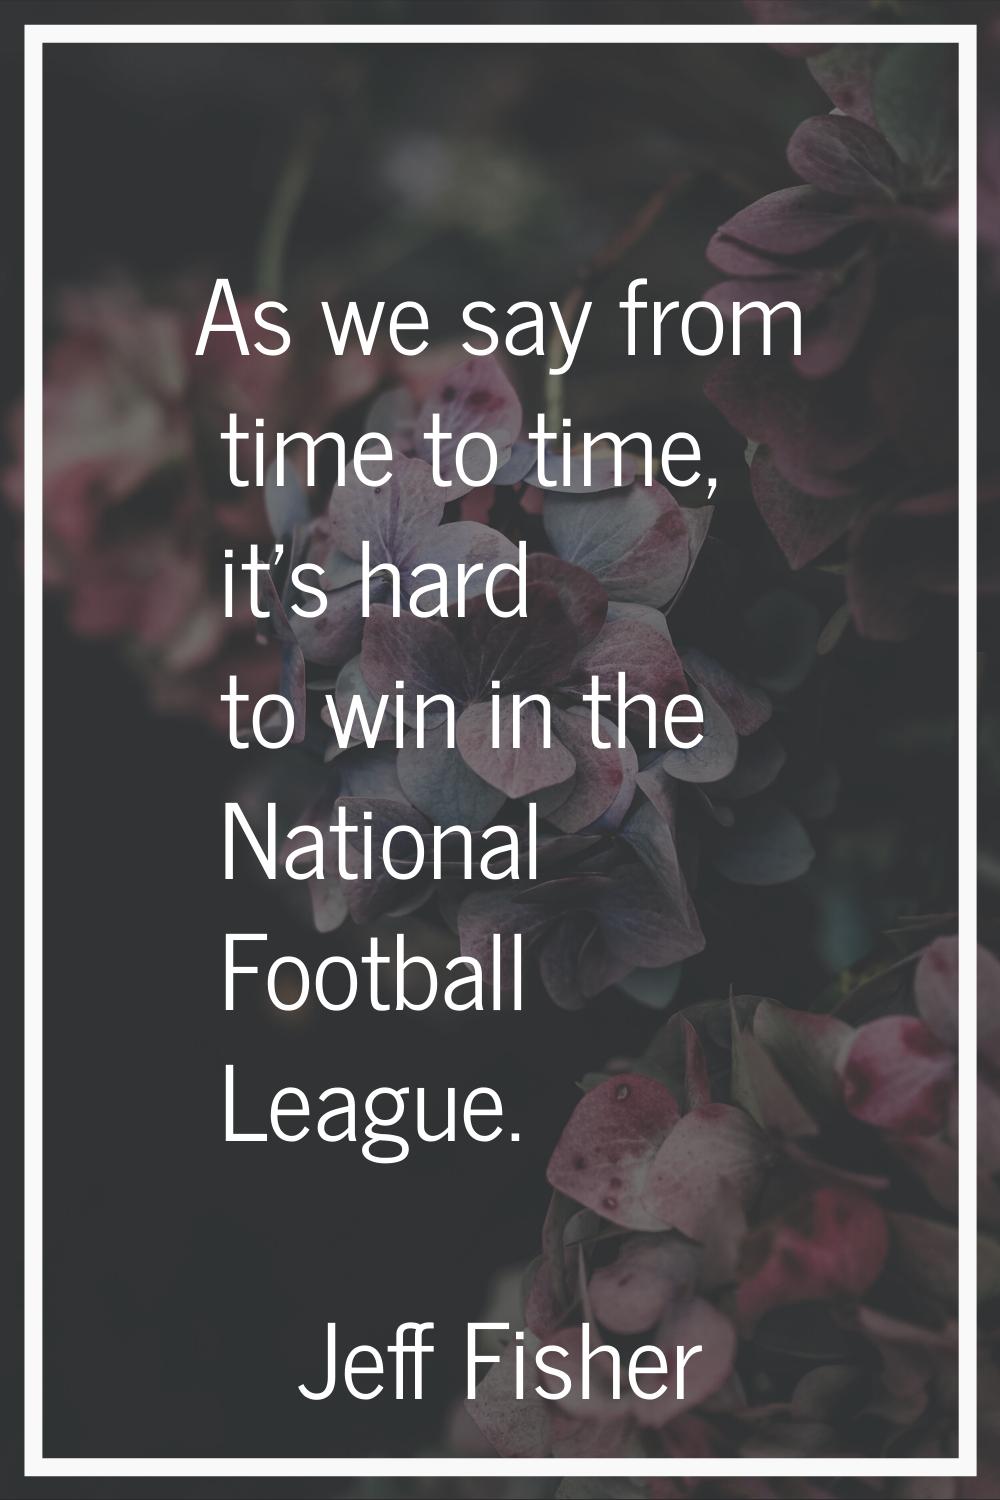 As we say from time to time, it's hard to win in the National Football League.